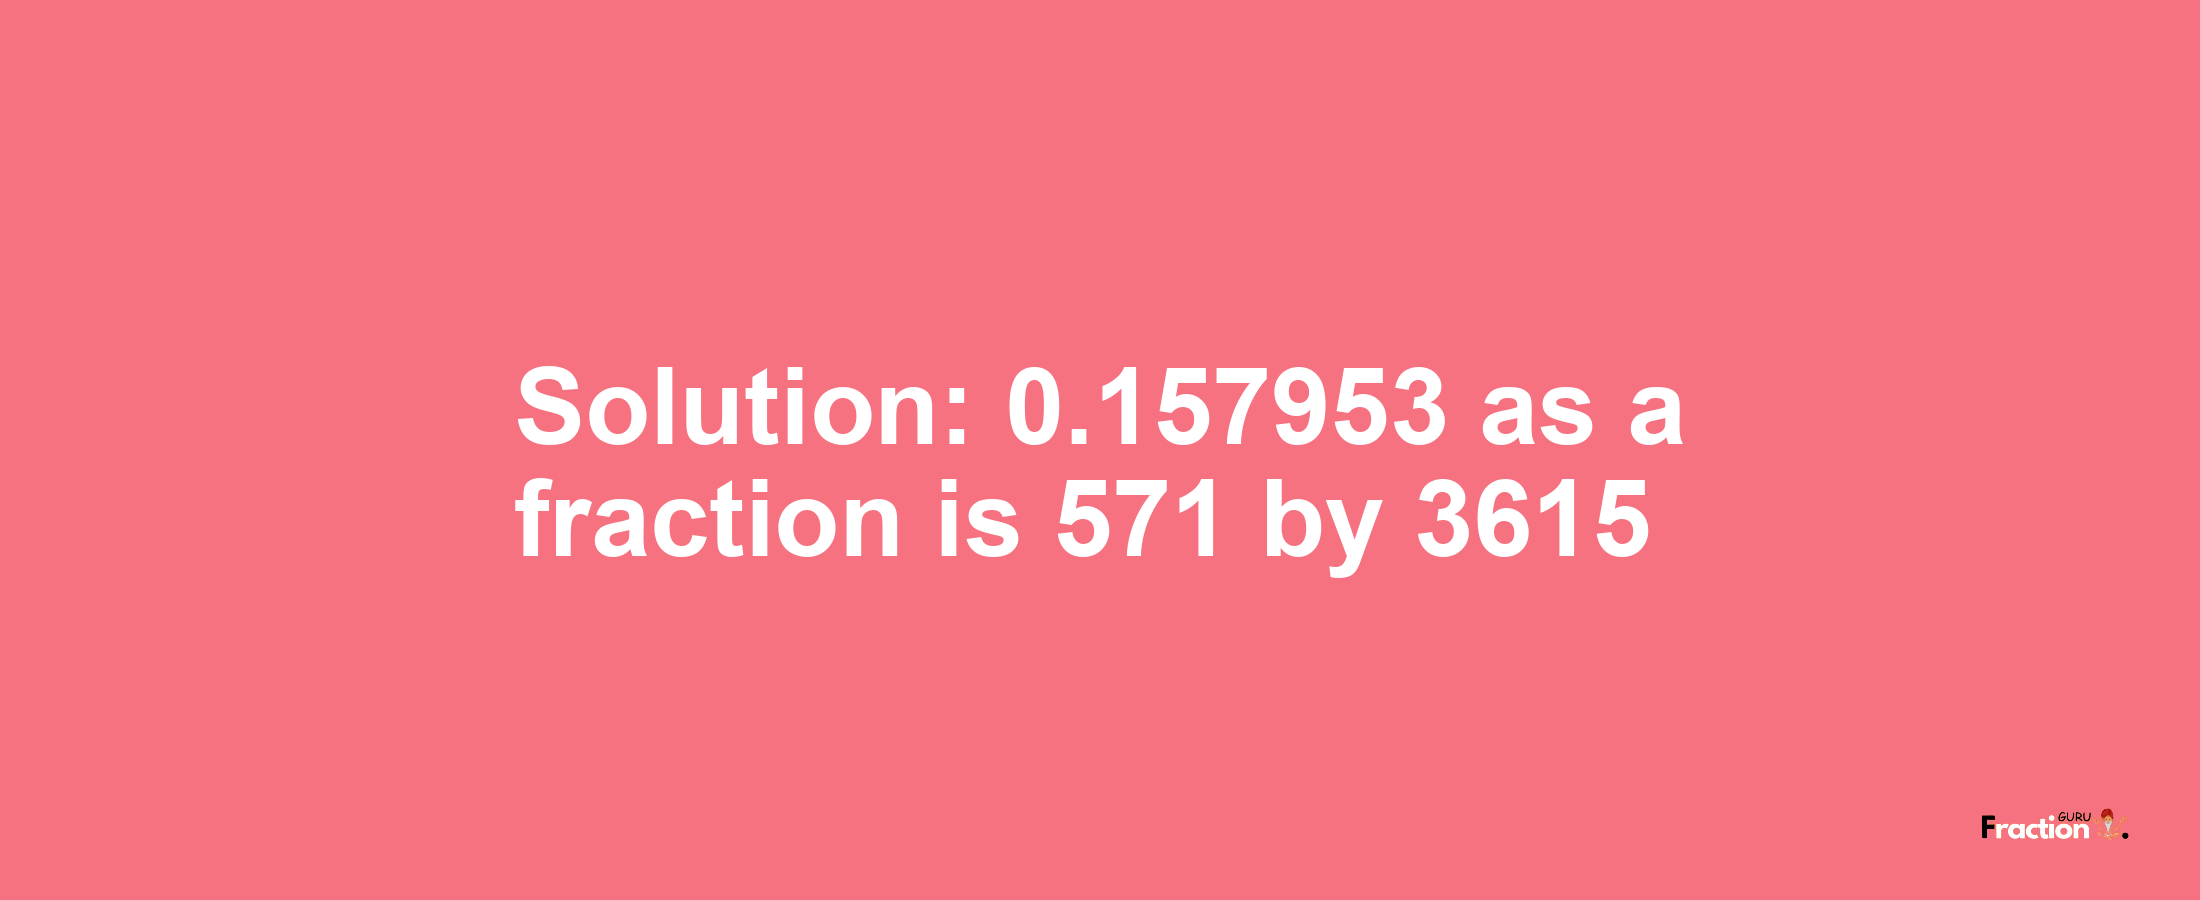 Solution:0.157953 as a fraction is 571/3615